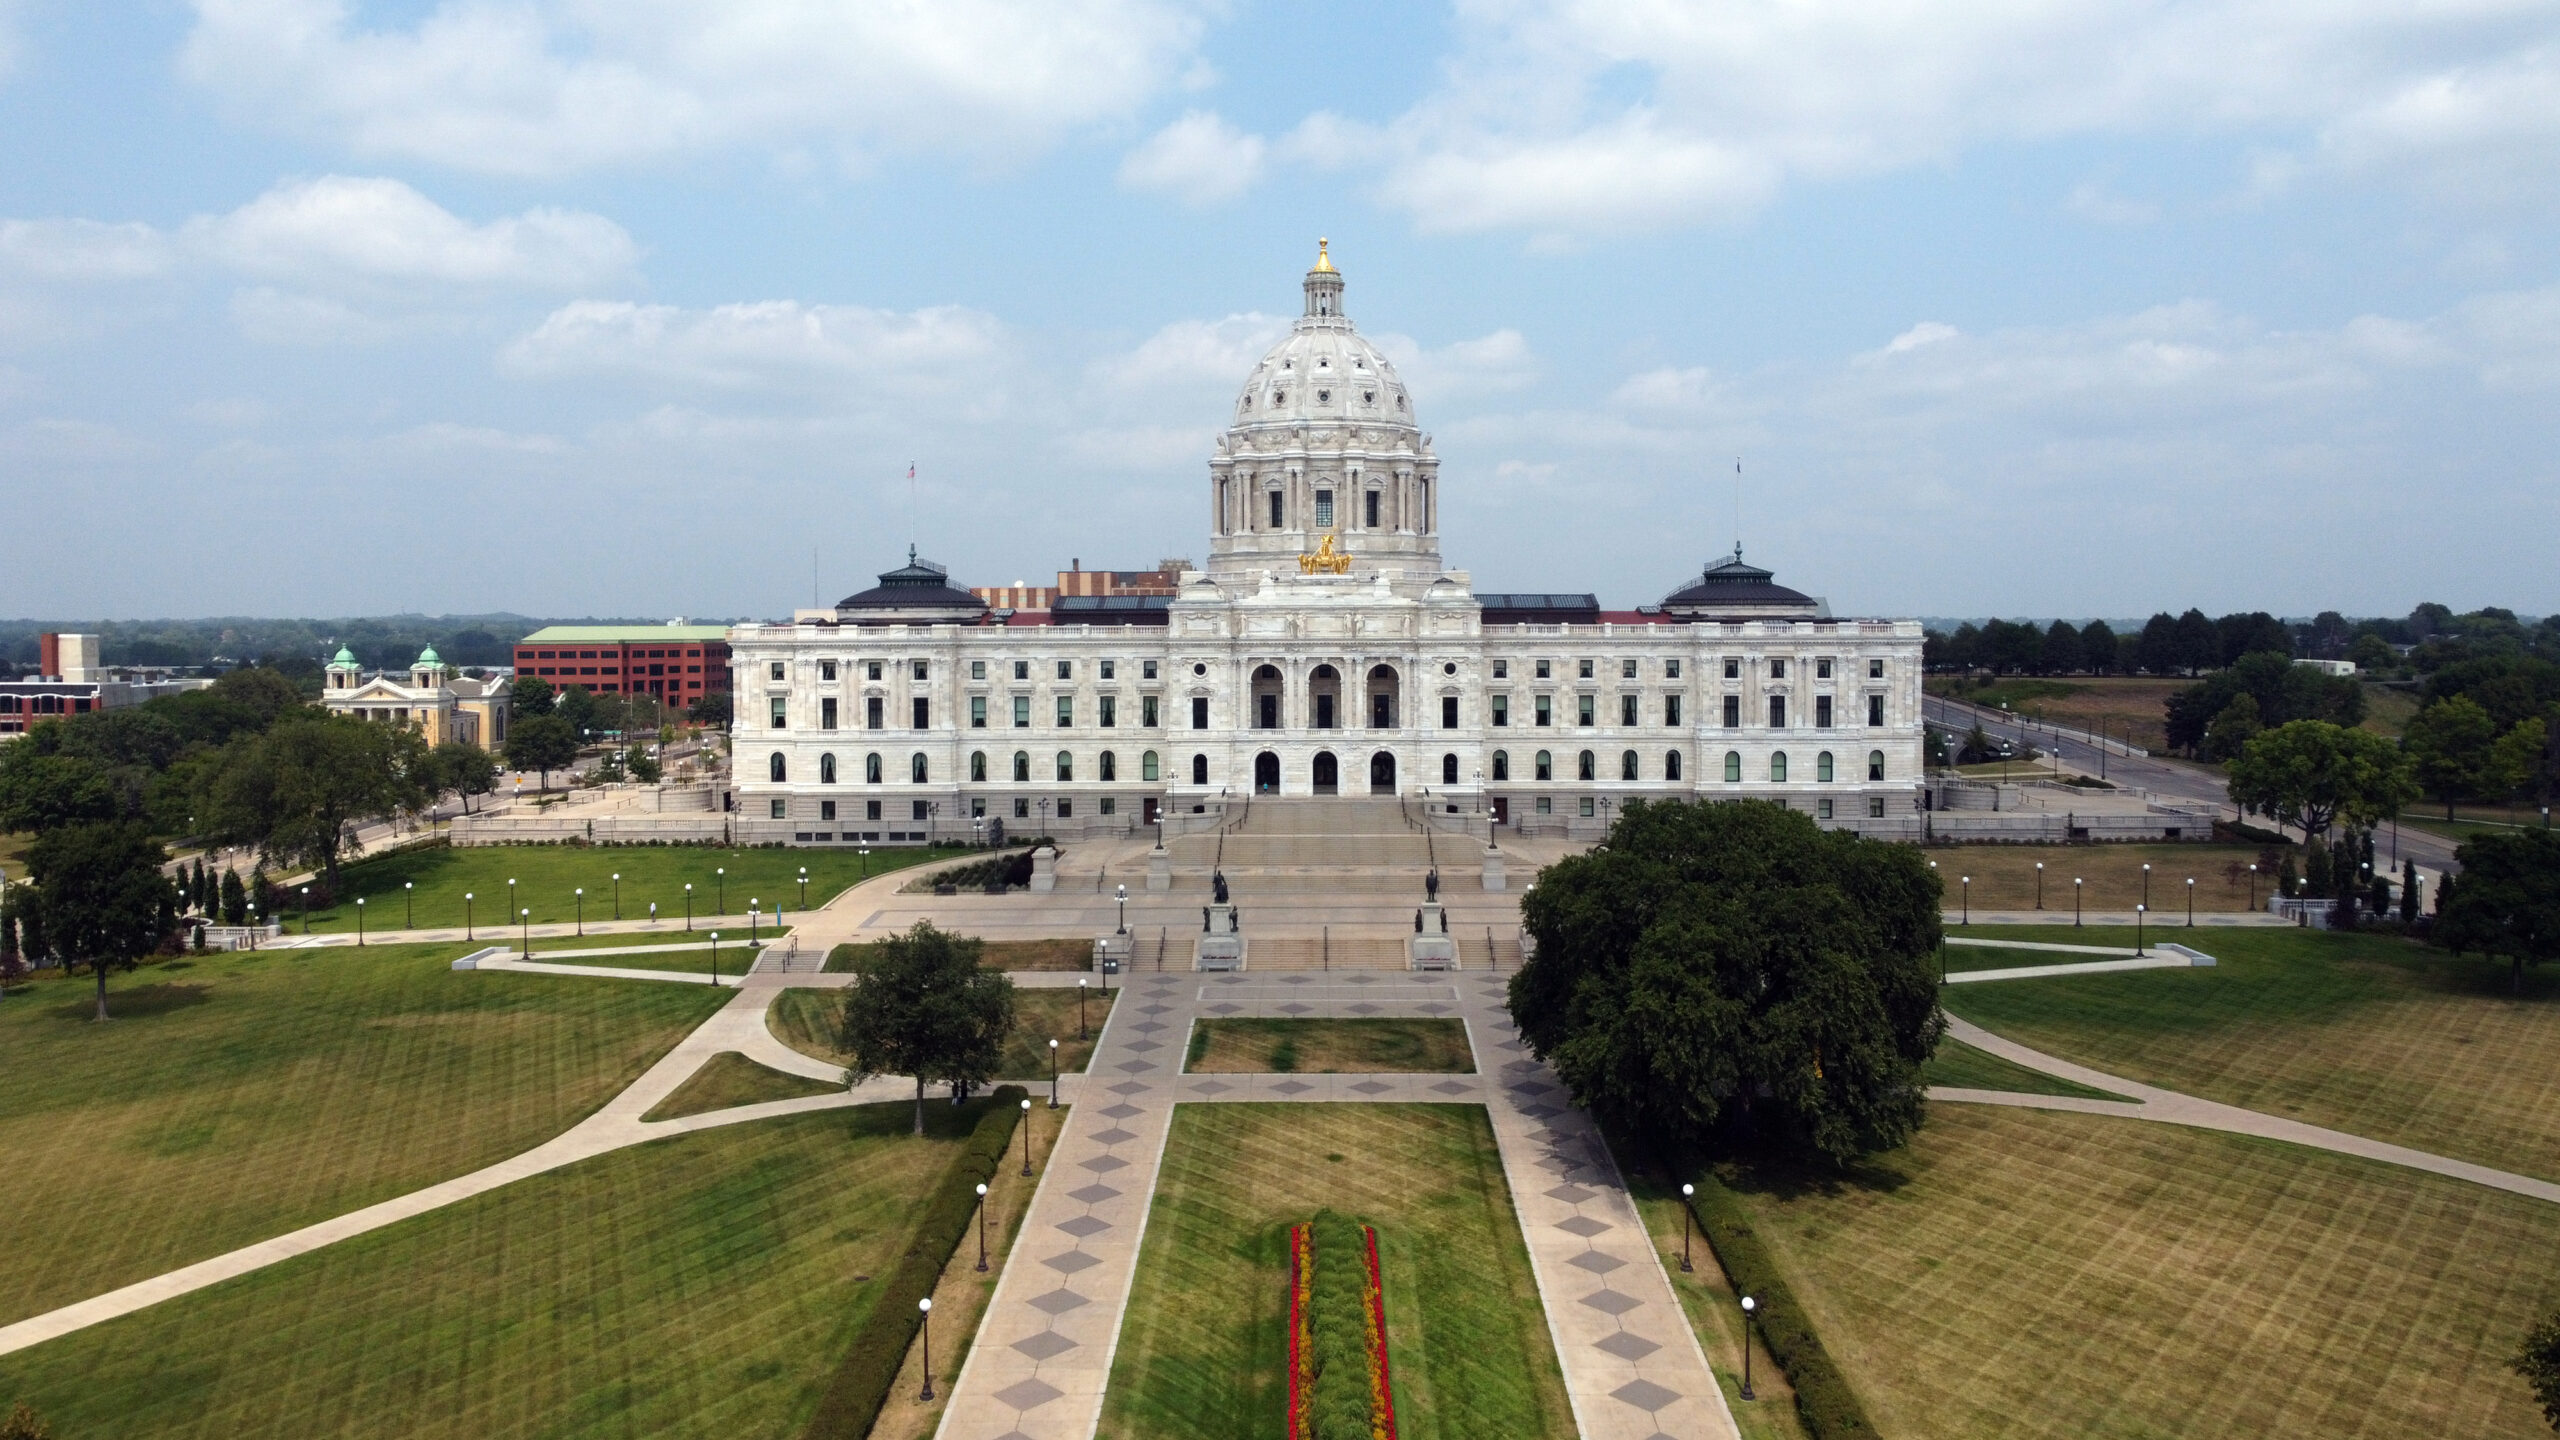 The Minnesota state capitol building in St. Paul, Minnesota.